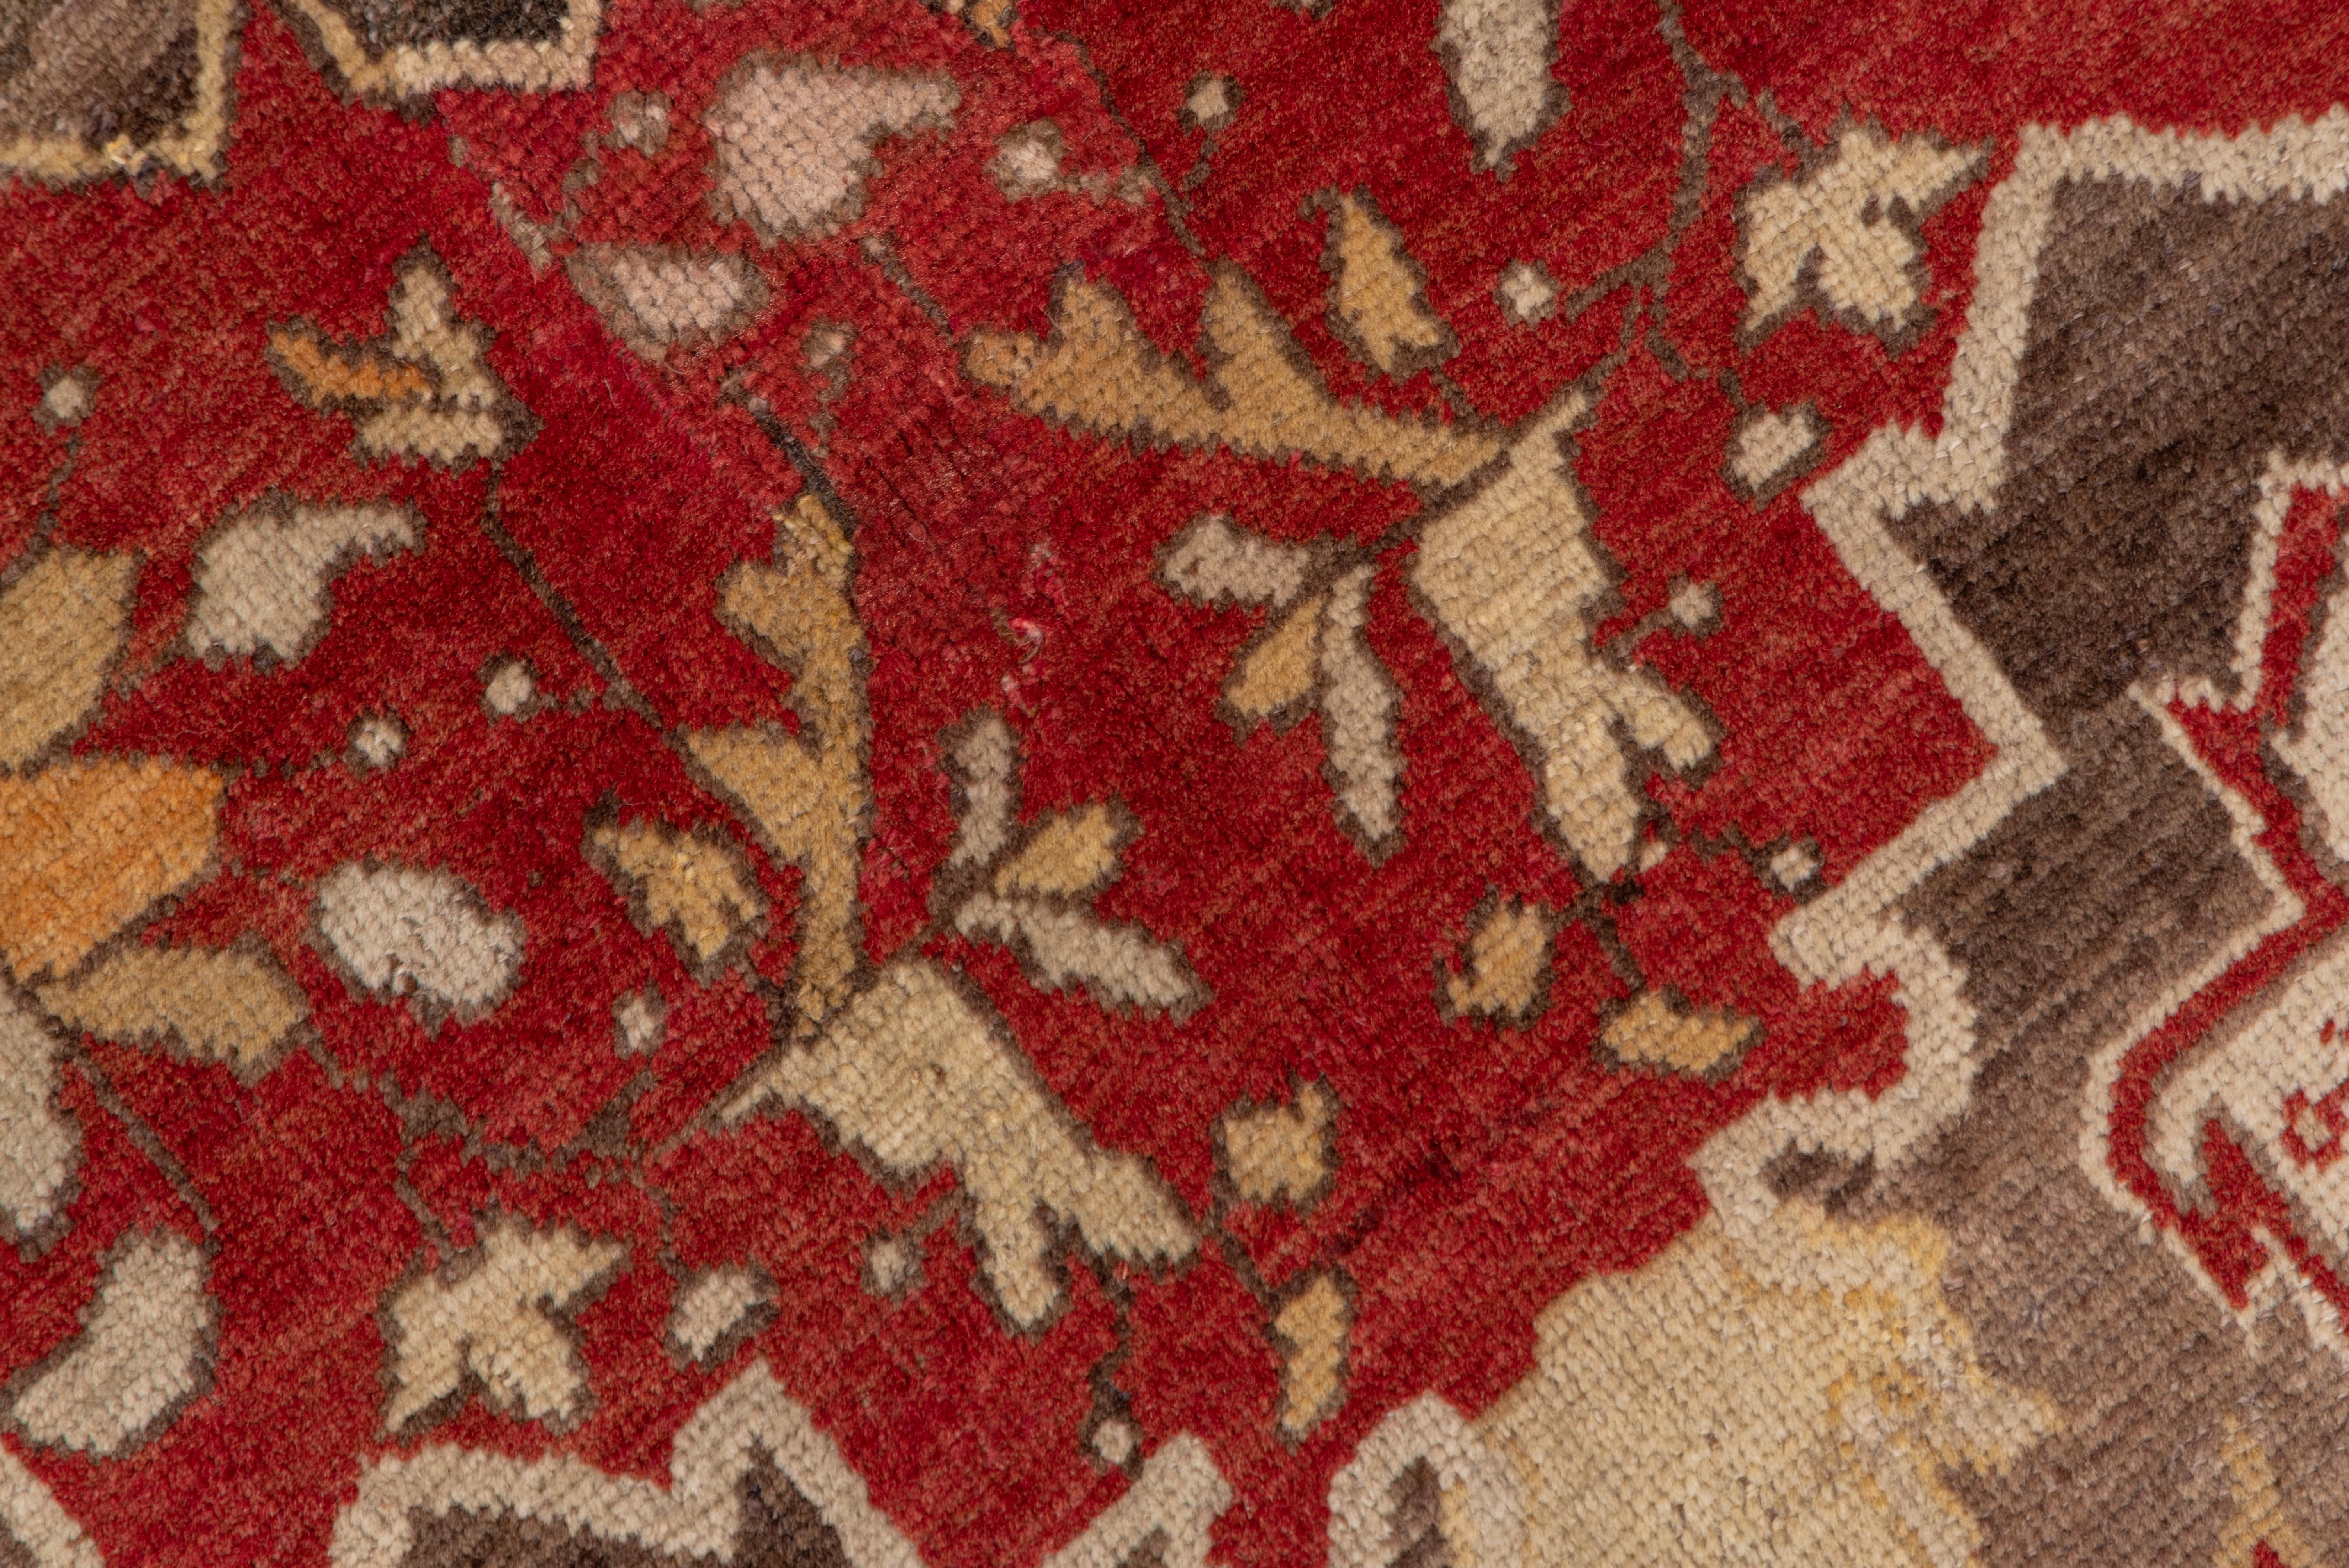 Fine Antique Turkish Sivas Rug, Red and Brown Tones, circa 1930s In Good Condition For Sale In New York, NY